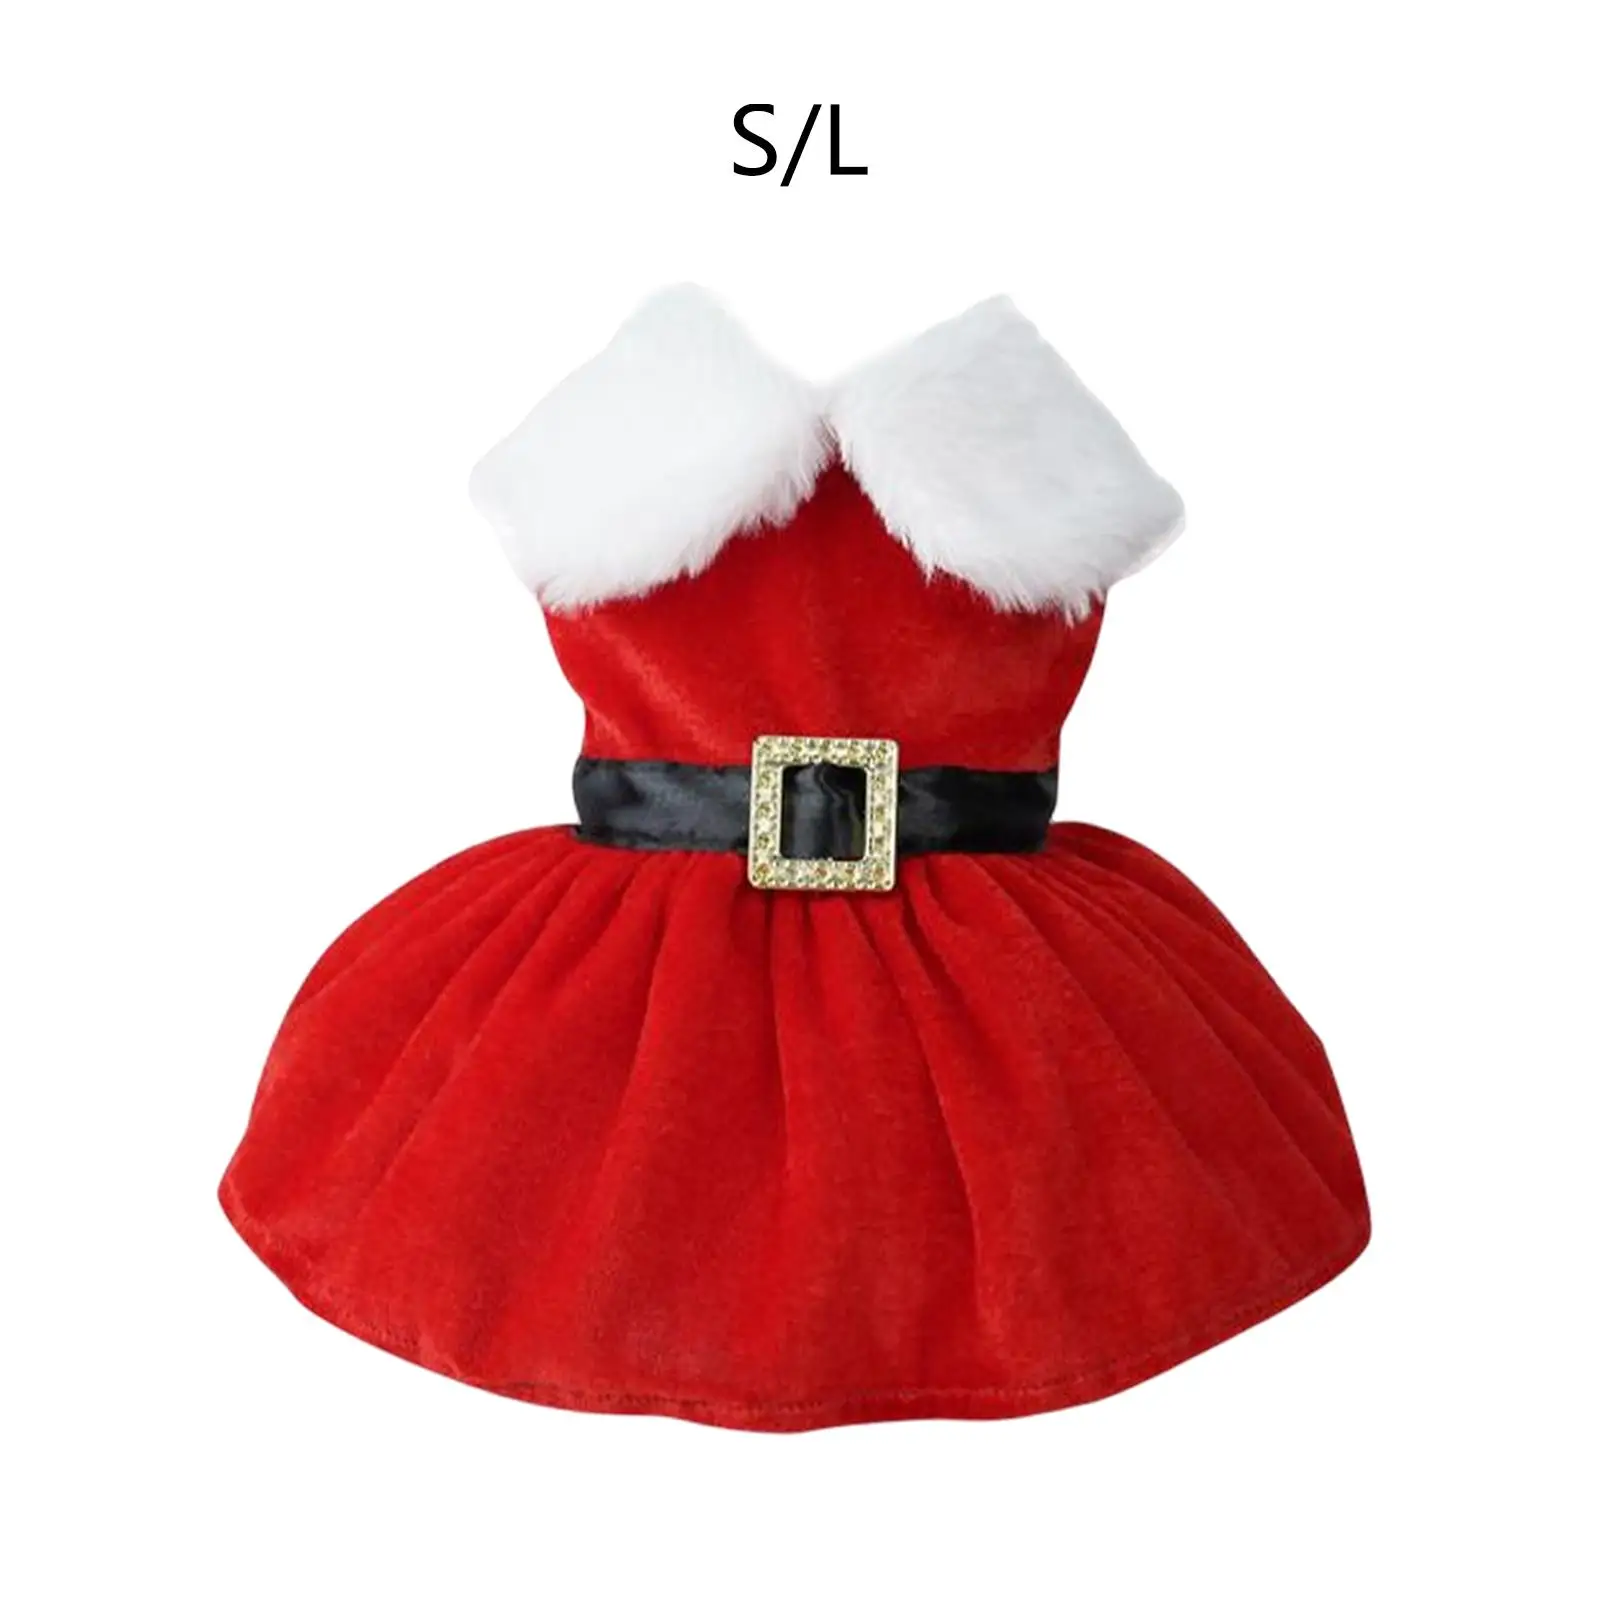 Pet Christmas Costume Clothes Dress up Skirt Flannel Party Outfit Holiday Christmas Dress Clothing Soft Comfortable Cosplay Coat